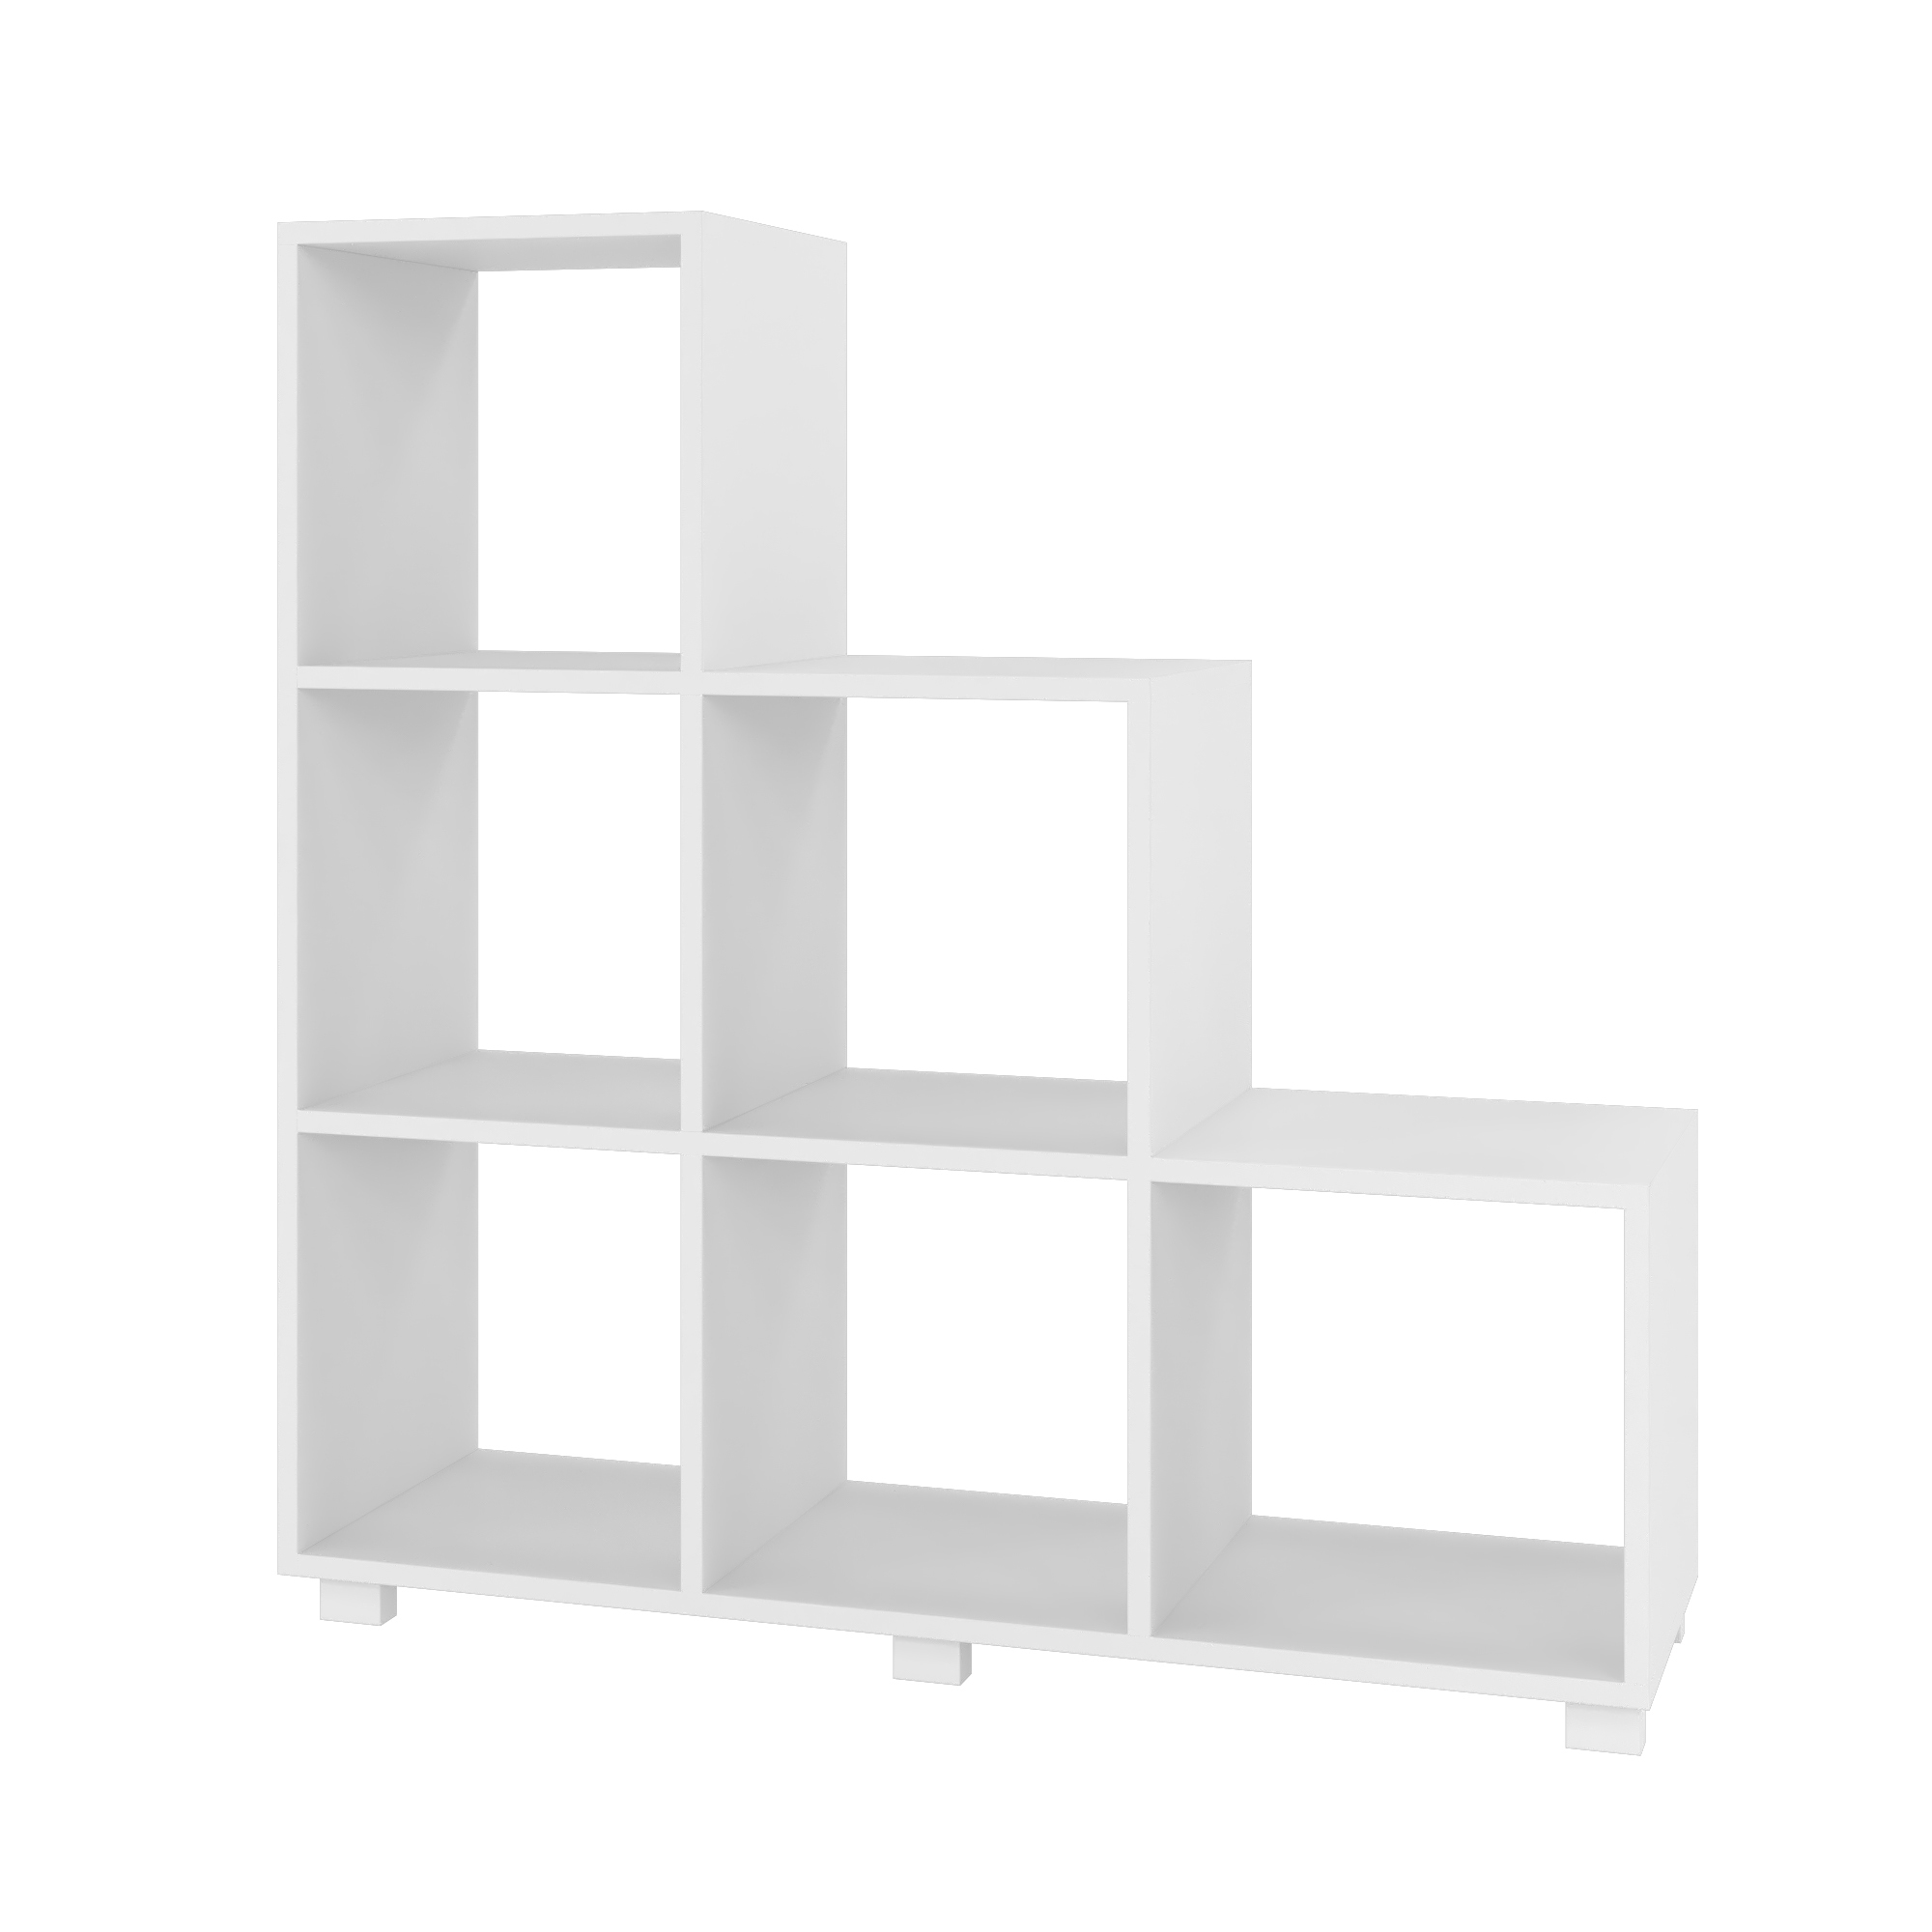 Manhattan Comfort, Cascavel Stair Cubbies with 6 shelves in White, Width 36.02 in, Height 38.58 in, Depth 11.57 in, Model 26AMC